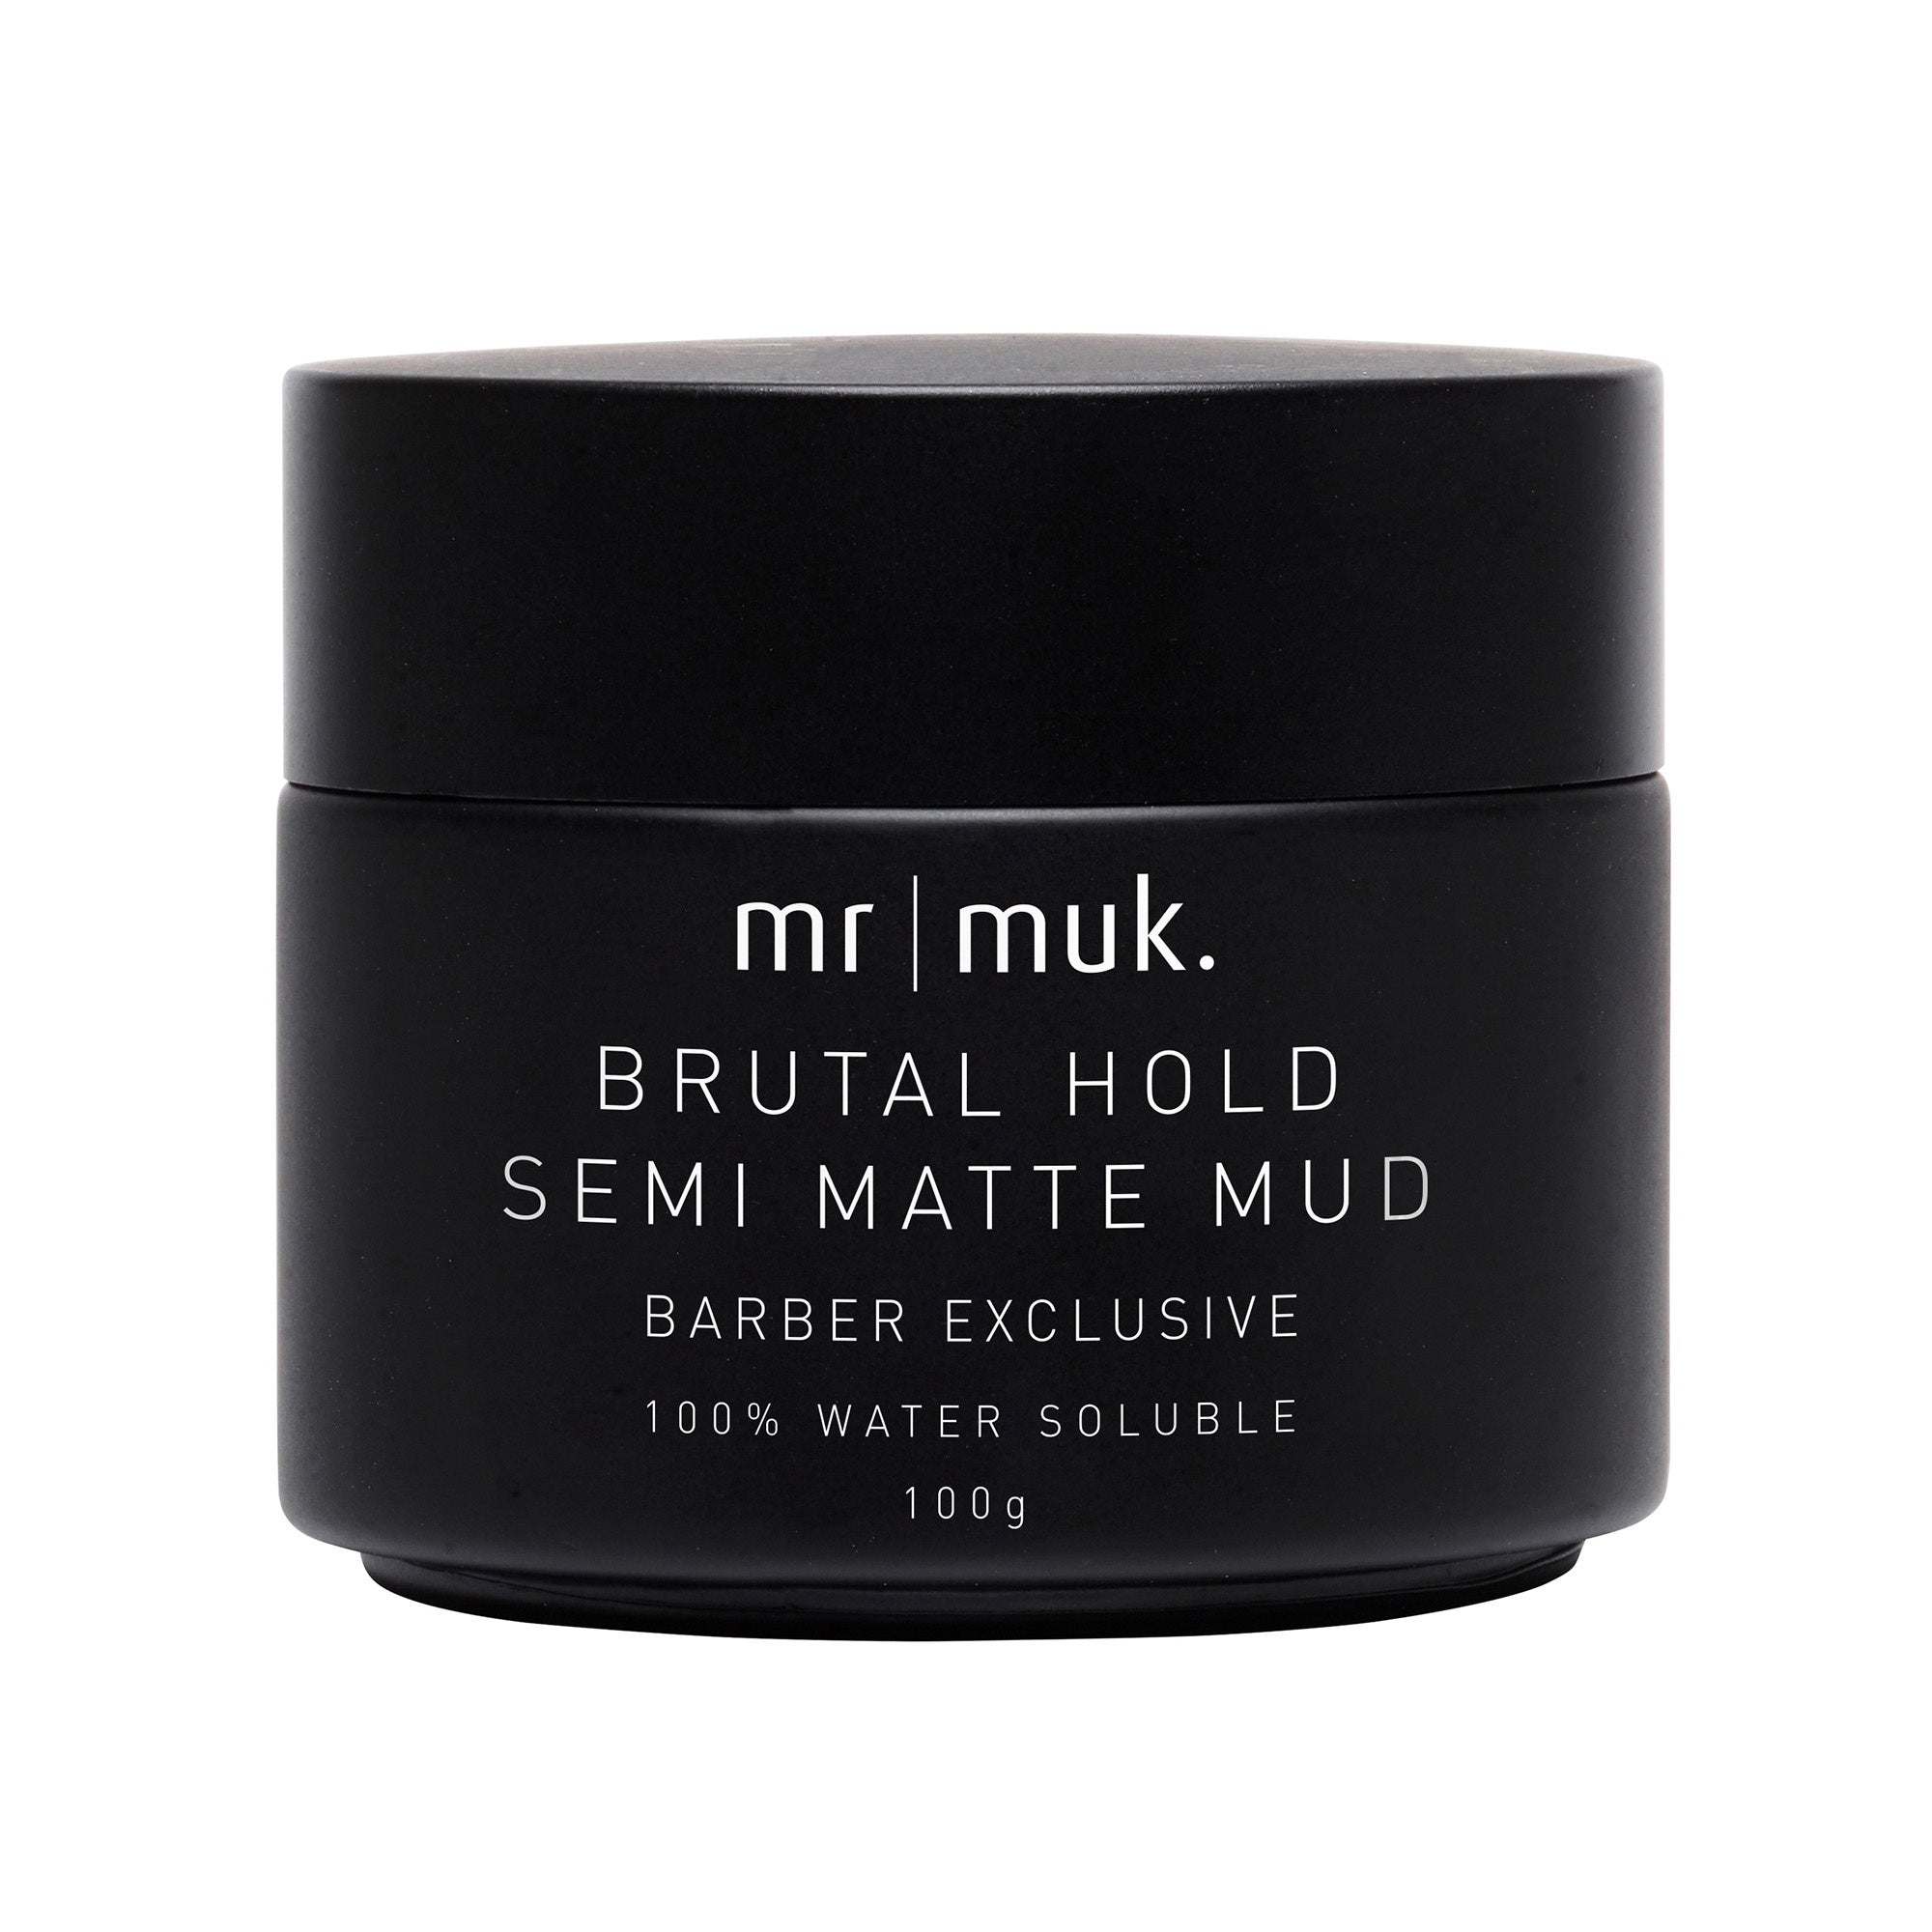 Mr Muk Brutal Hold Semi Matte Mud , a low sheen strong hold mud that is water soluble.